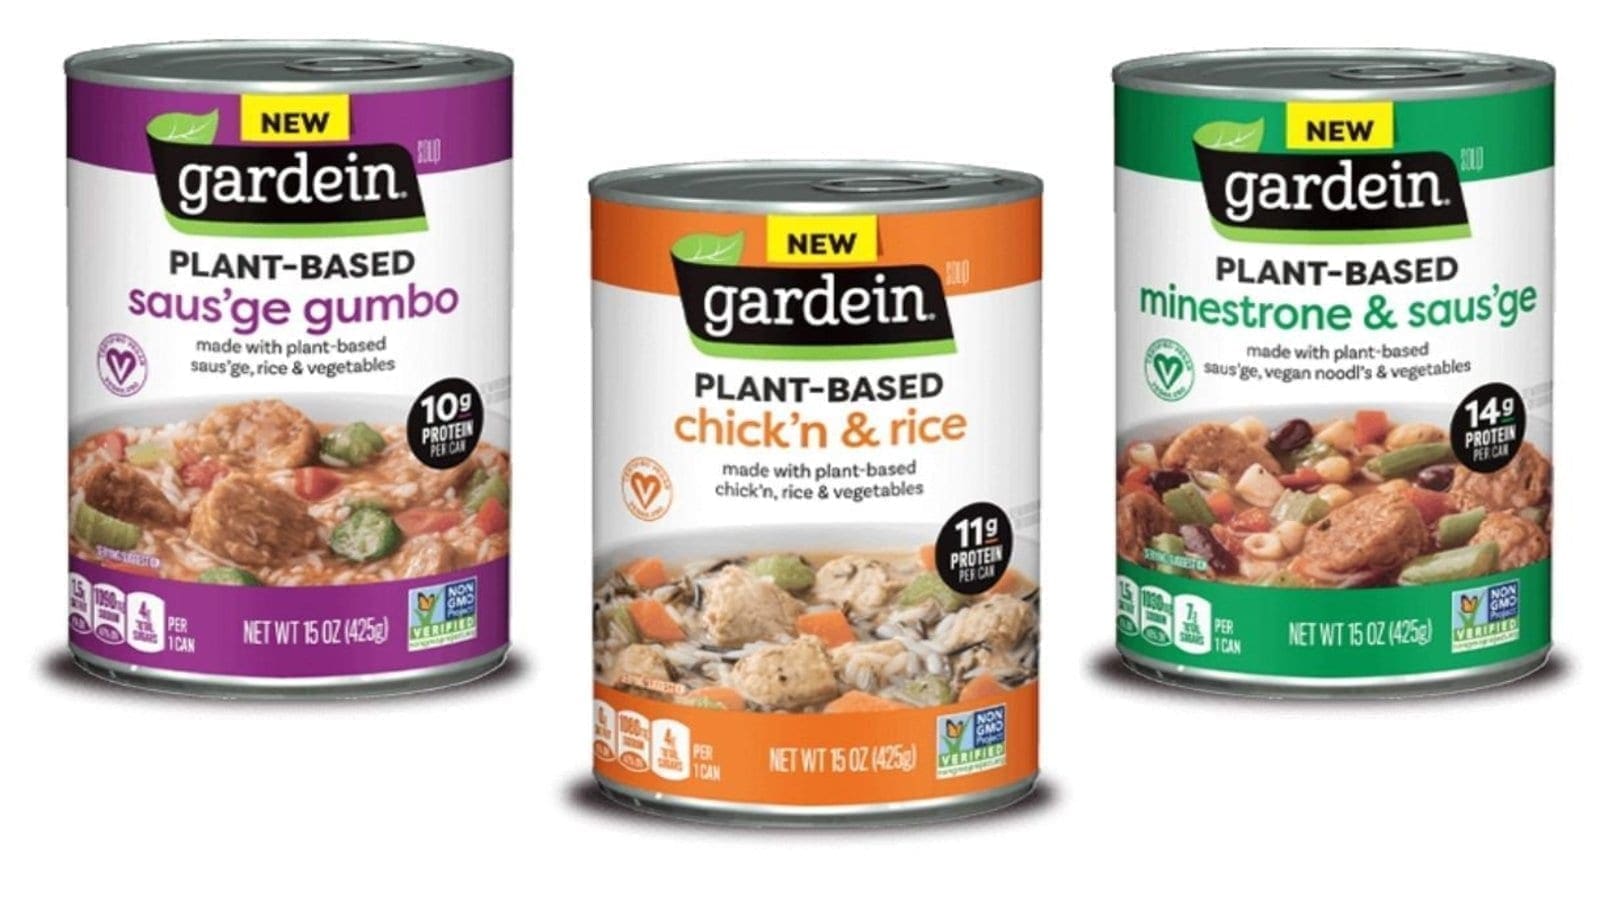 Conagra brands expands meat-alternative category launching plant-based soups